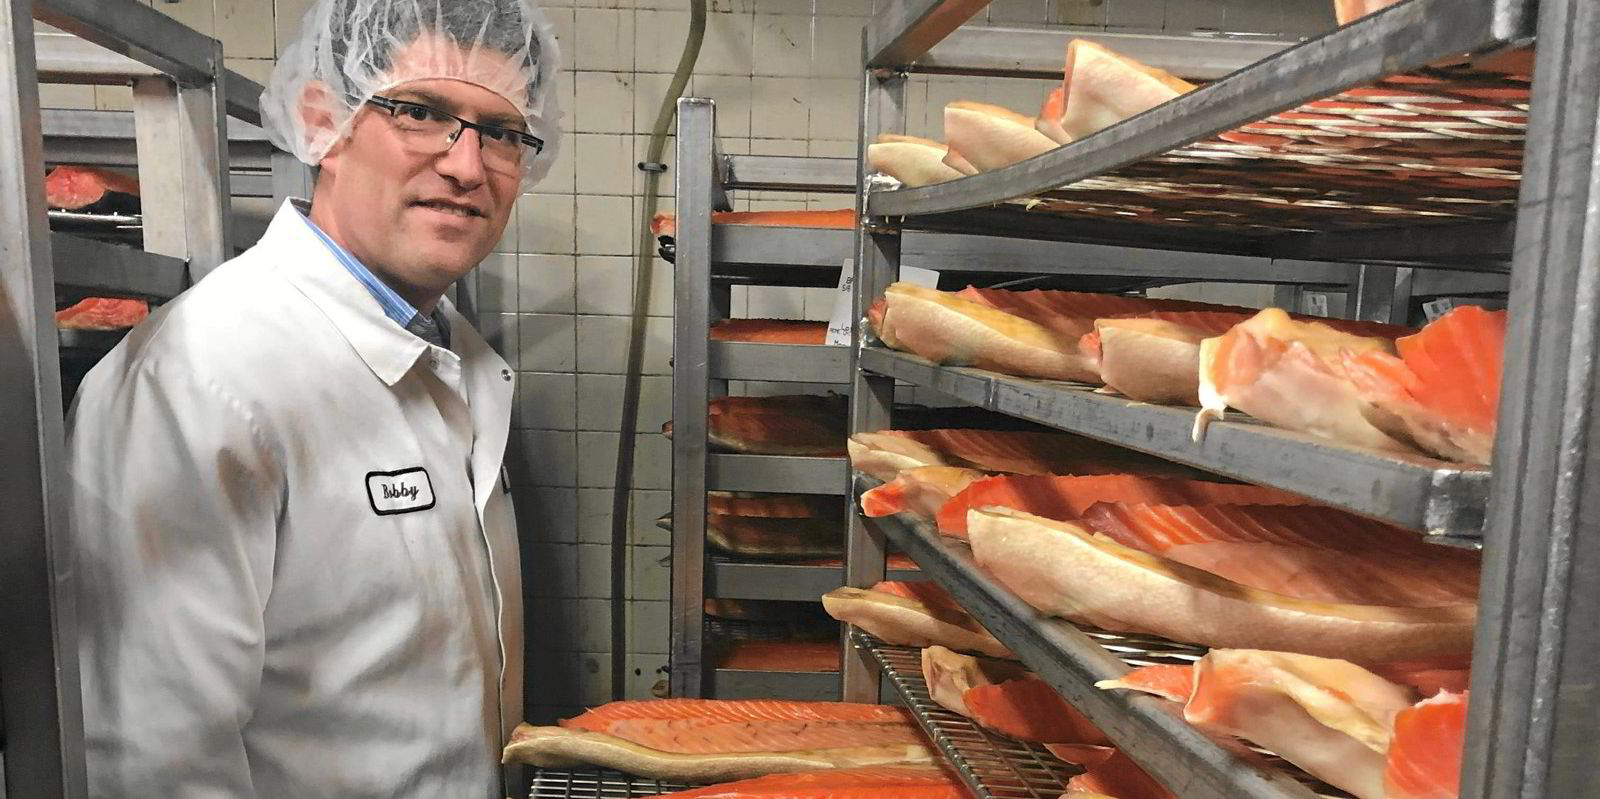 Acme Smoked Fish, EU firm ink deal for new smoked salmon